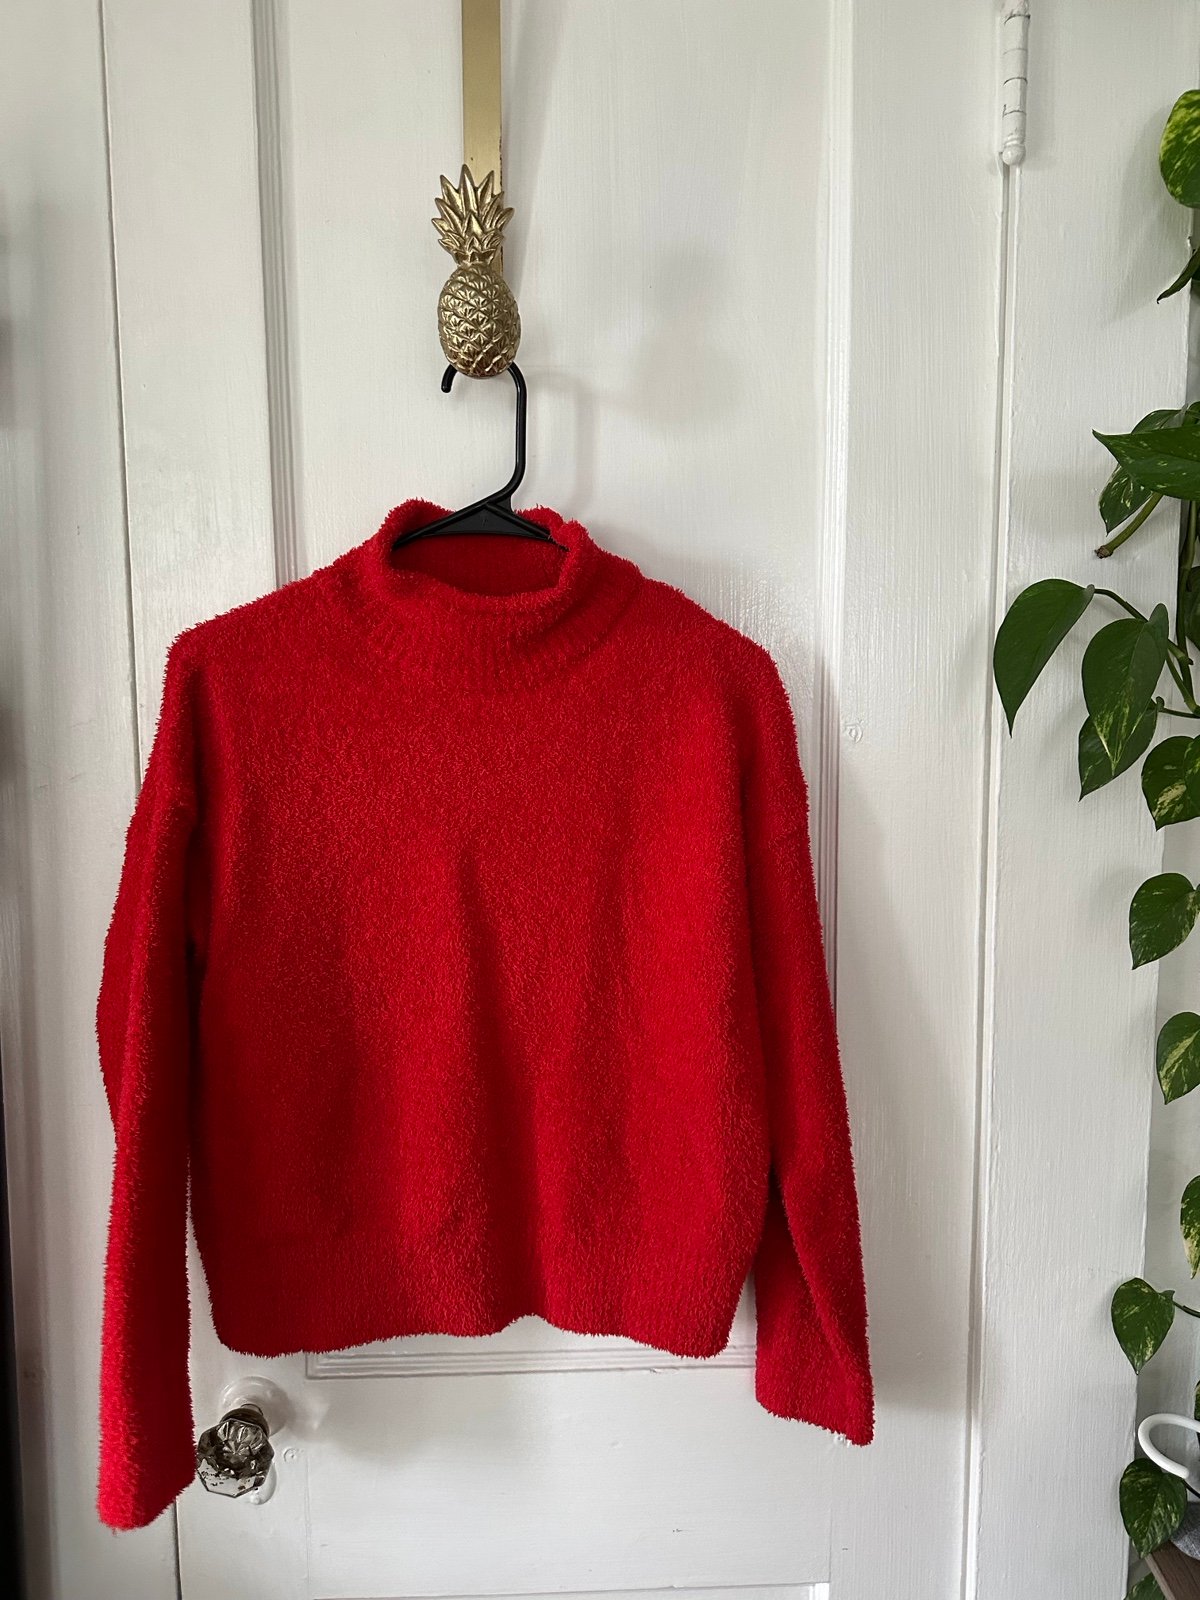 Special offer  Sincerely Jules Women’s size x-Small Red Sweater mjc2NCBWK Buying Cheap